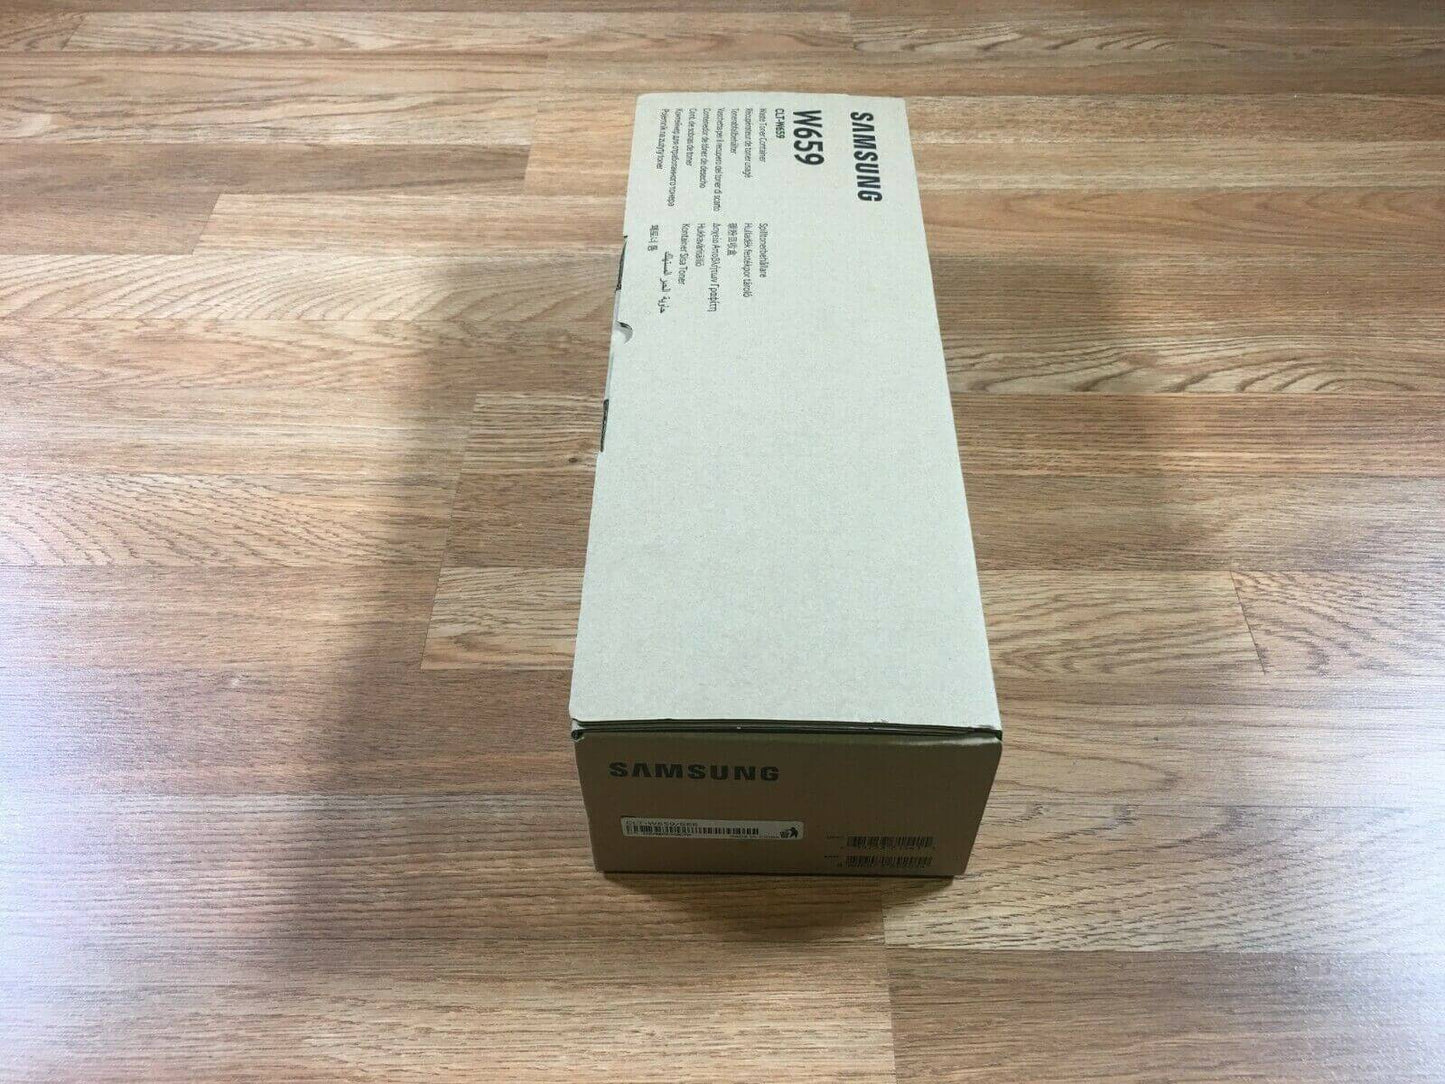 Samsung CLT-W659 Waste Toner Container For CLX-8640ND-8650ND Same Day Shipping - copier-clearance-center